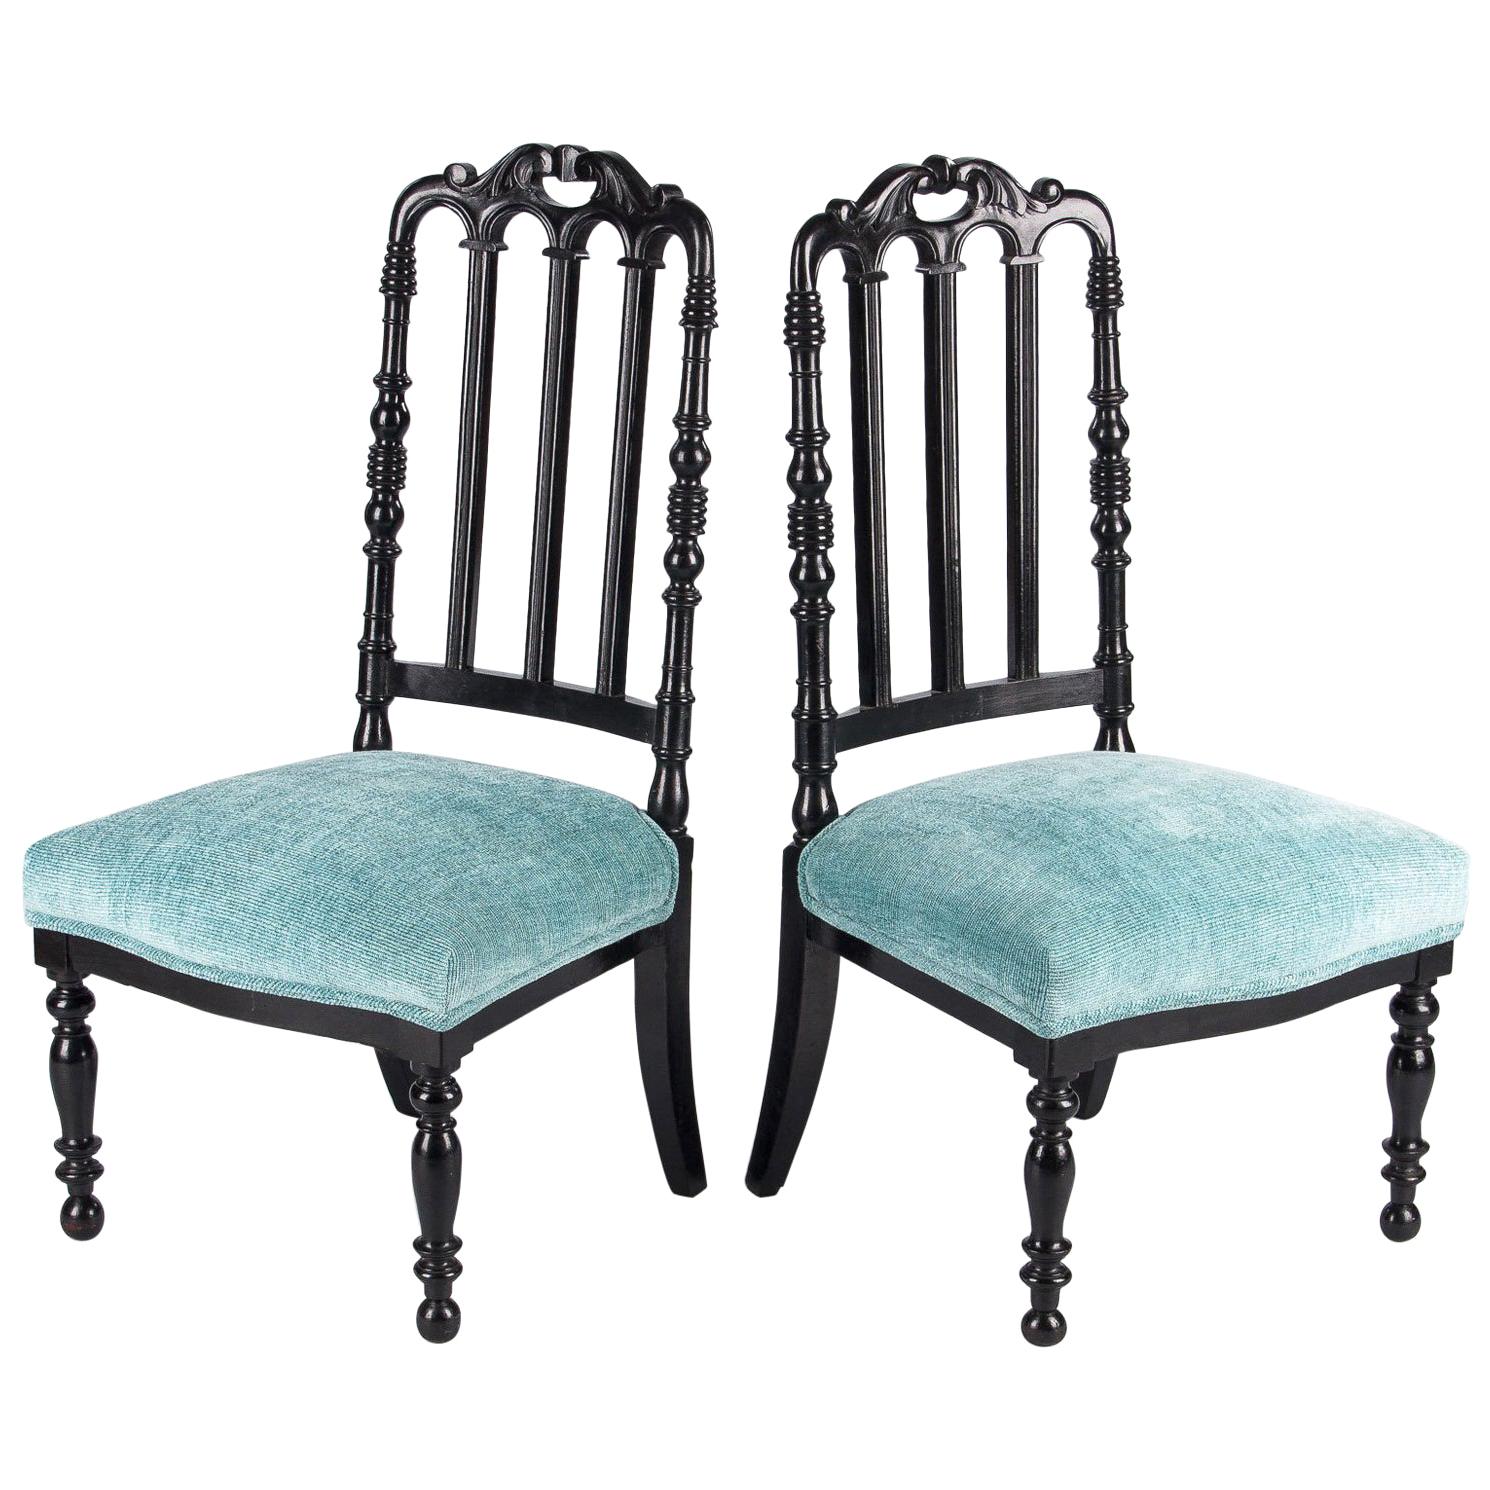 Pair of Napoleon III Ebonized Pear Wood "Chauffeuses" Low Chairs, 1870s